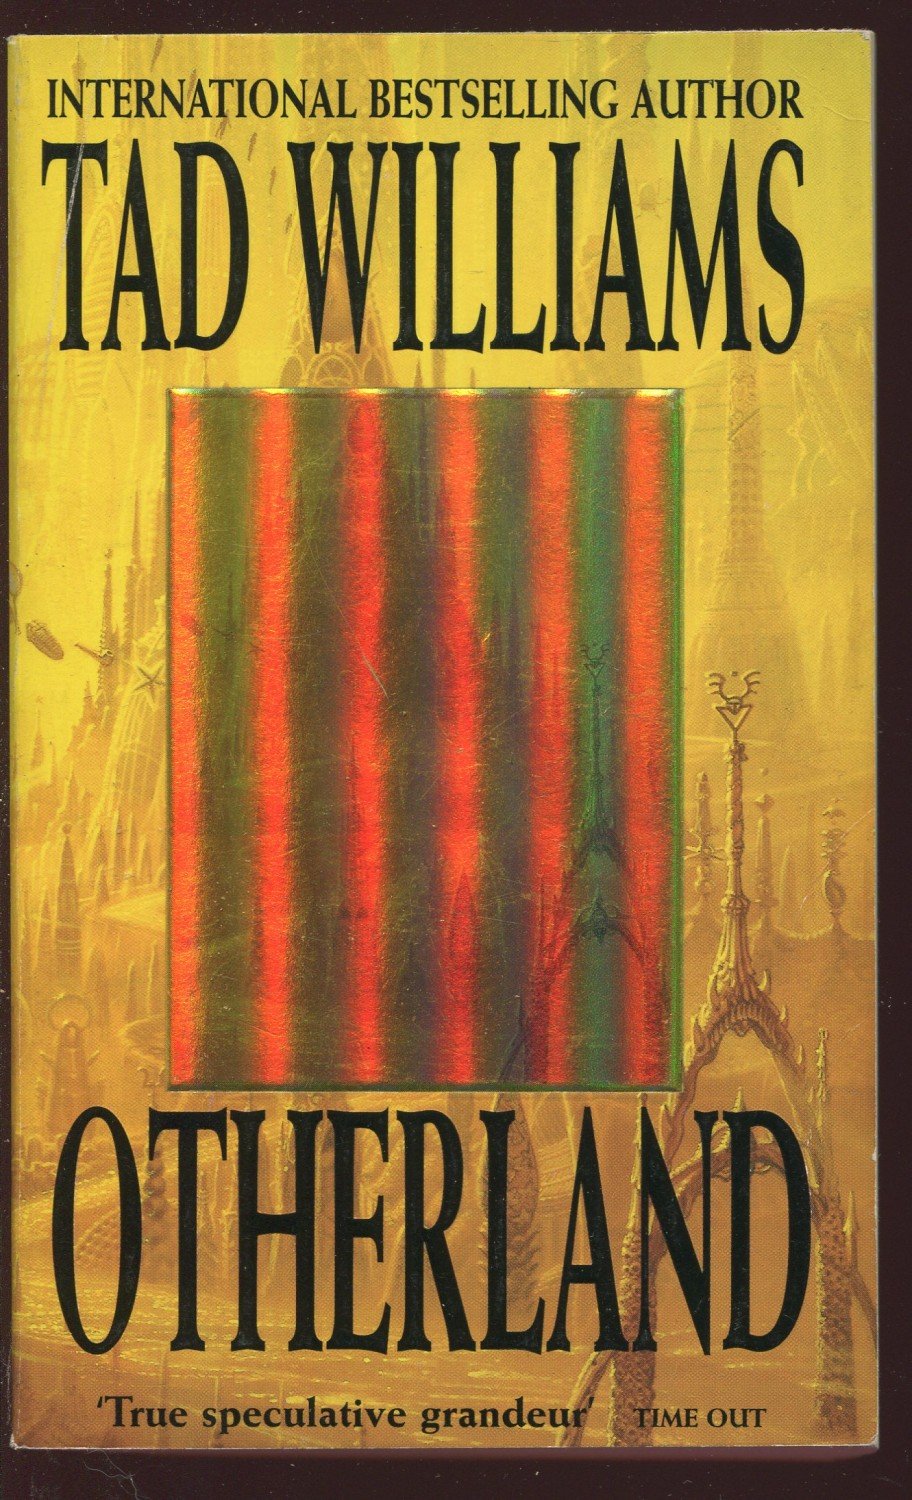 tad williams otherland cliff notes